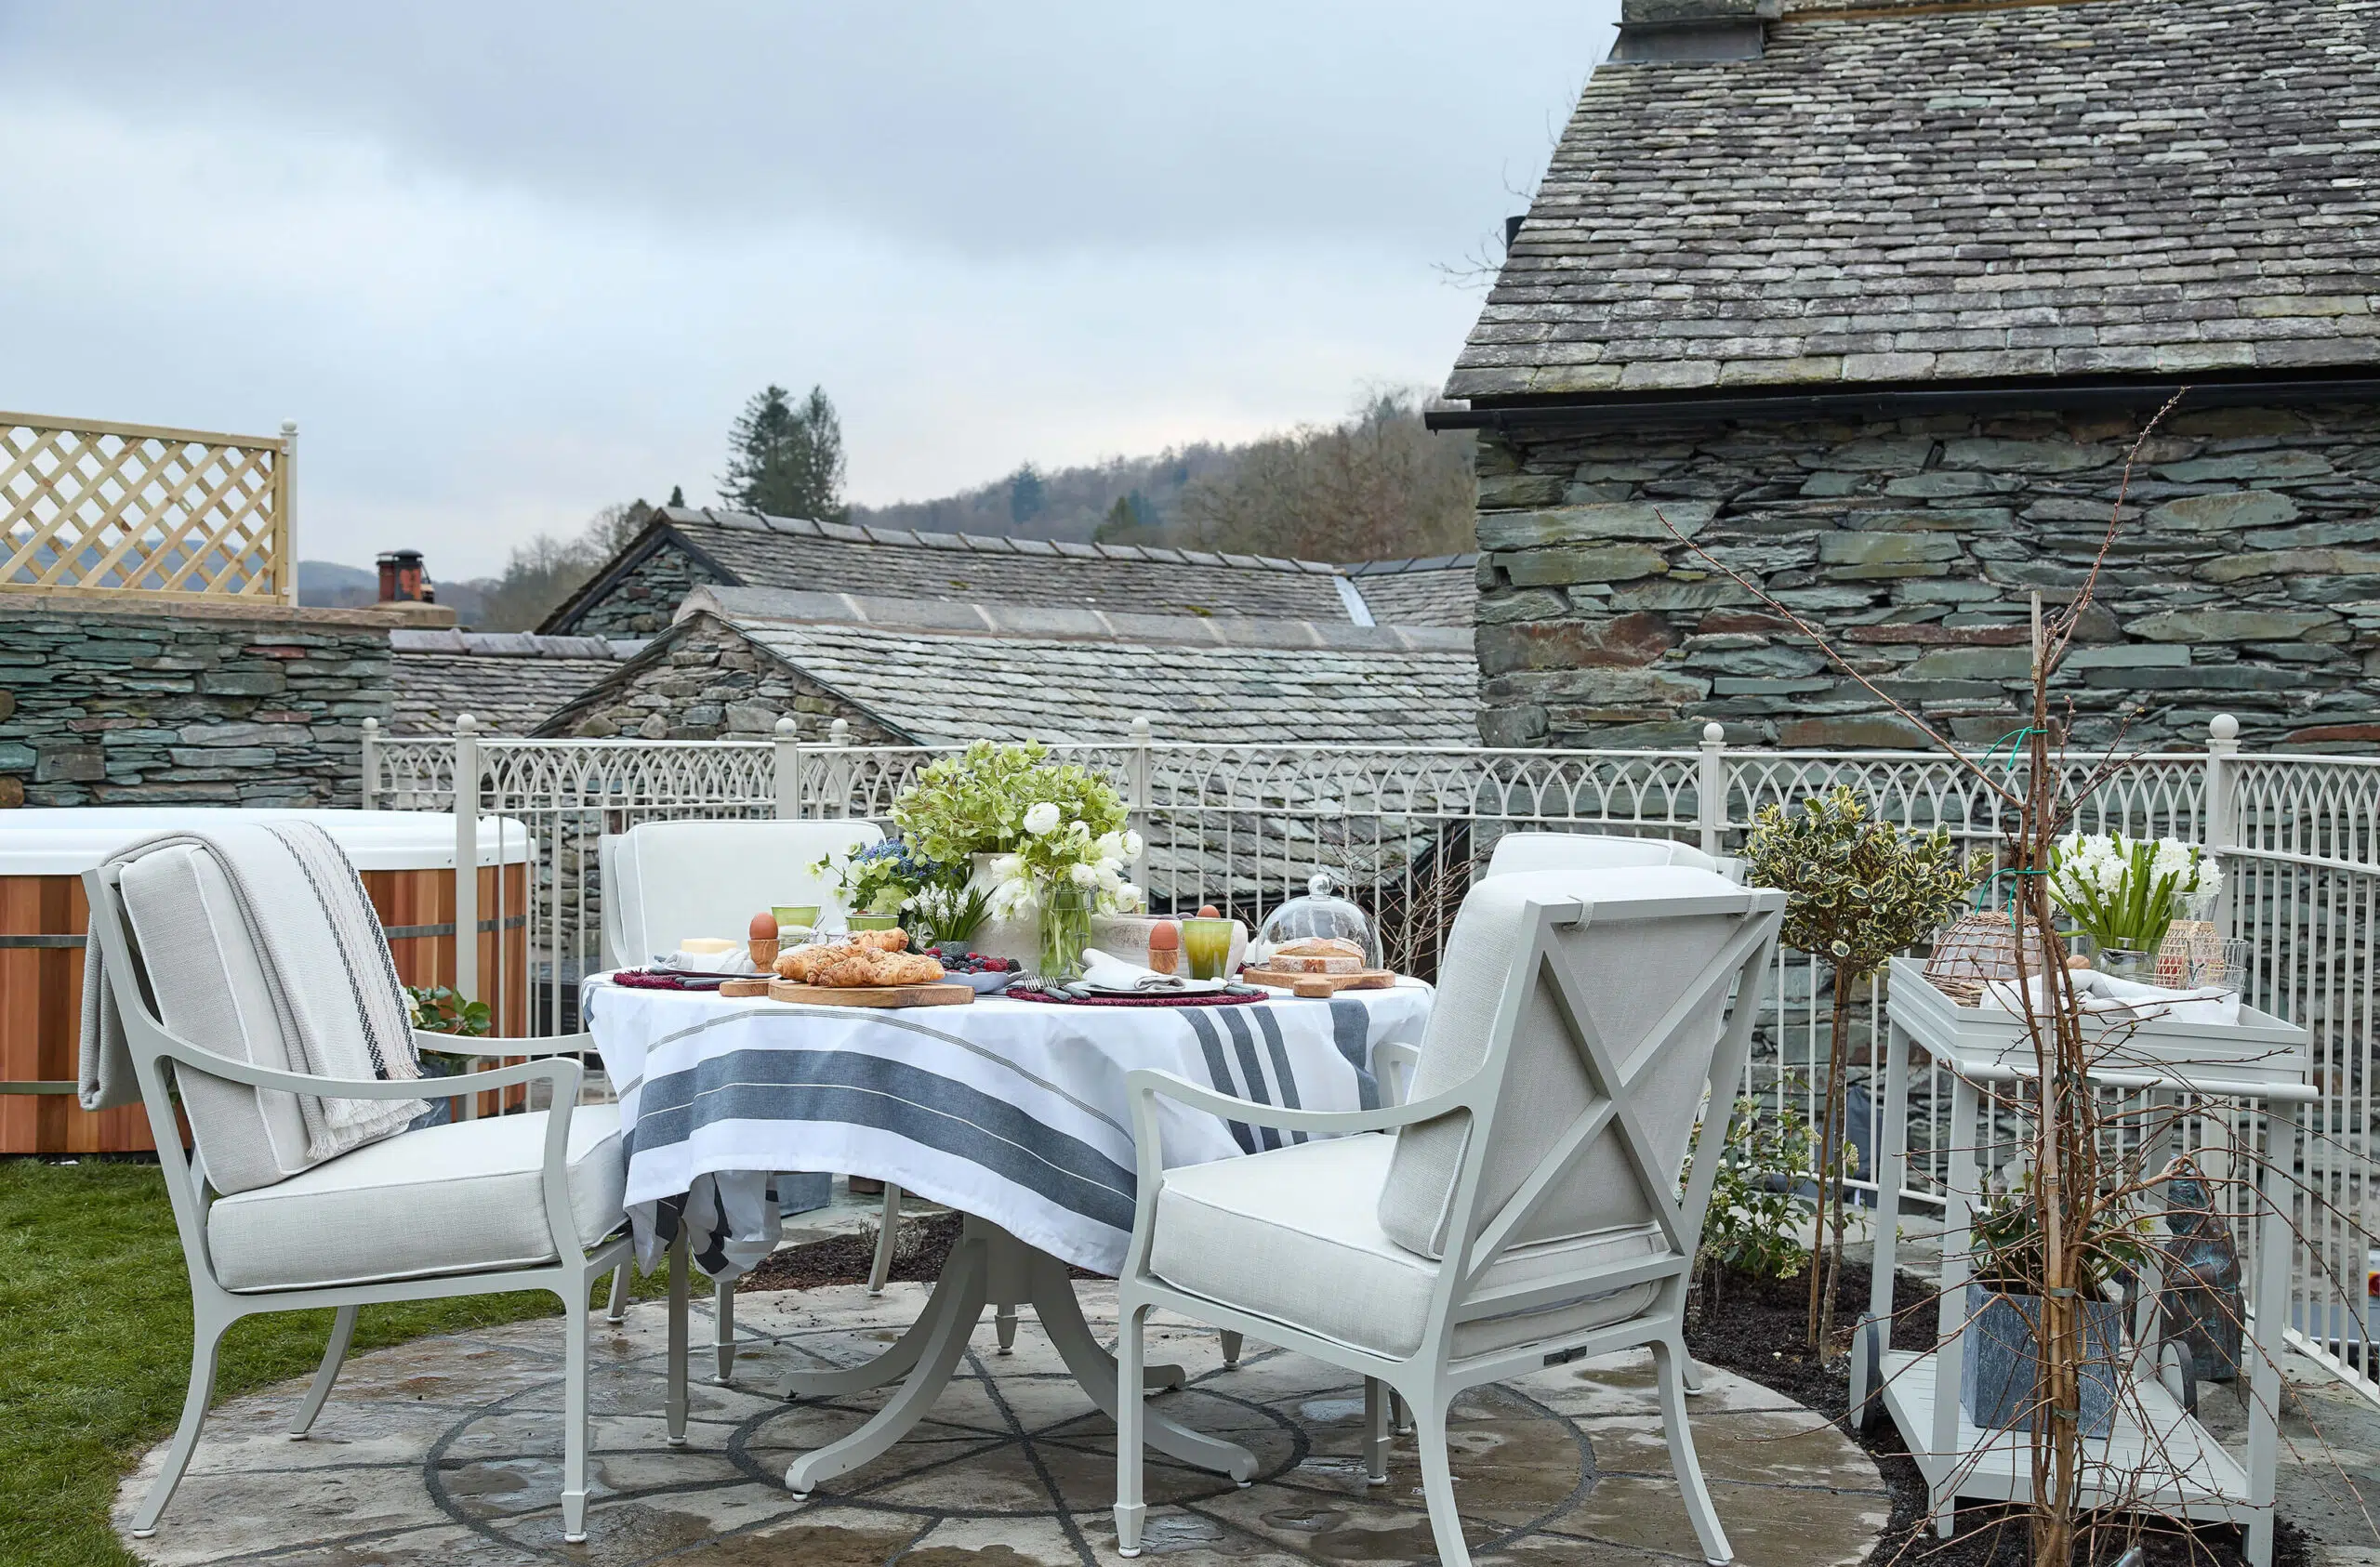 Outdoor seating of project in lake district